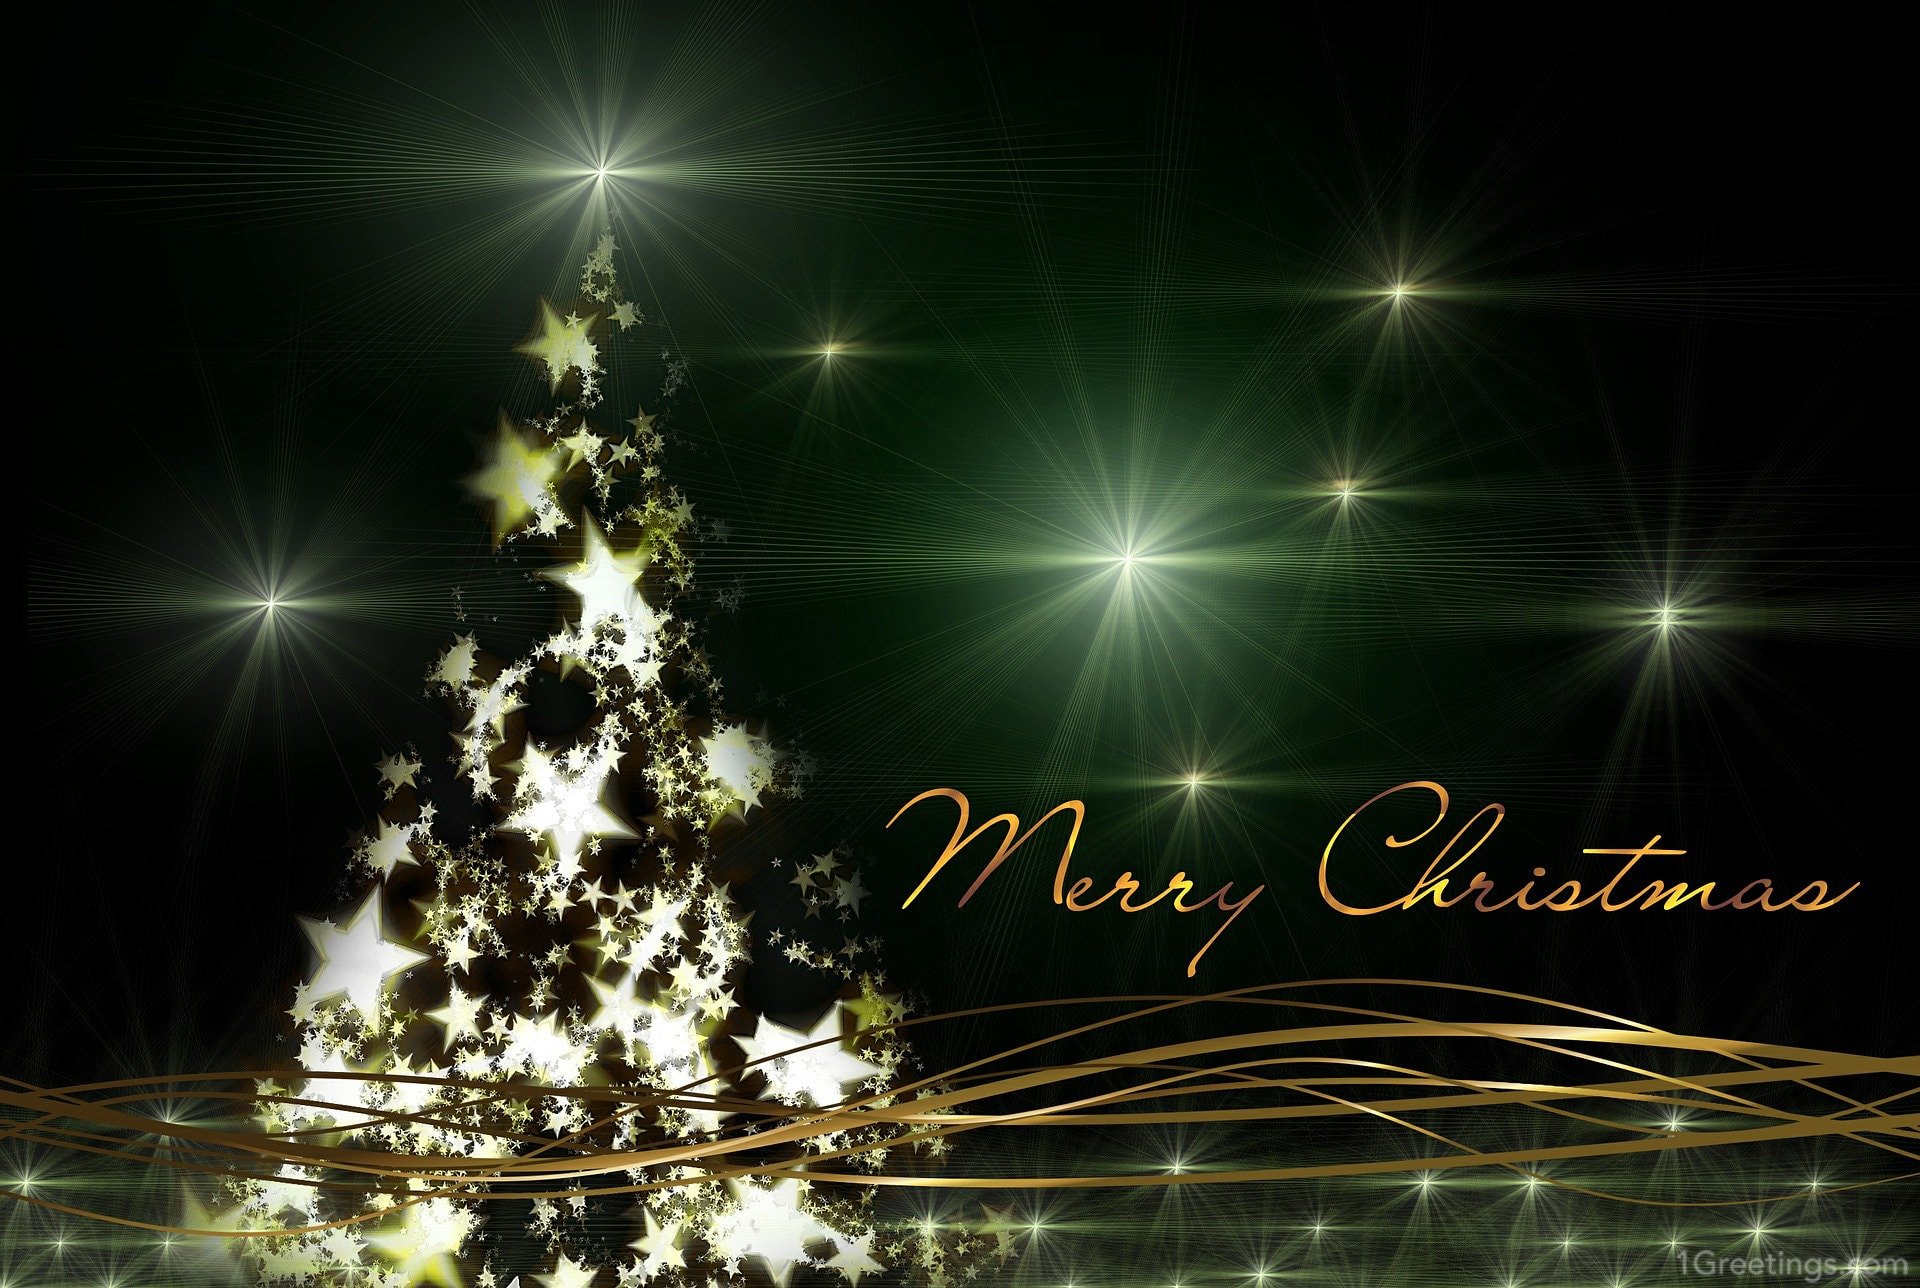 Merry Christmas Wallpaper Full HD Free Download - Images 8